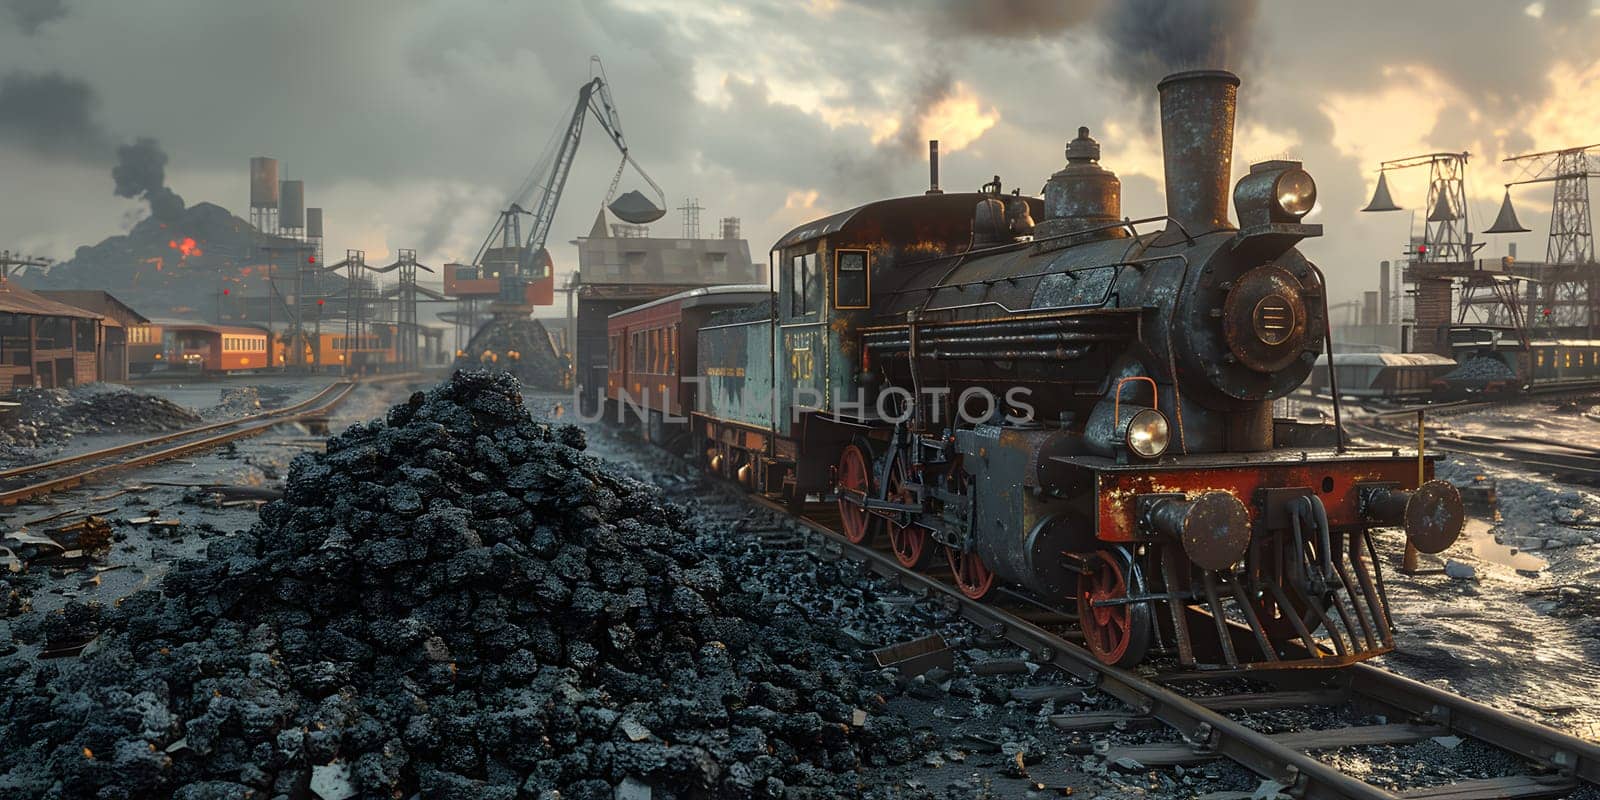 A steam train chugs past a coal pile under a cloudy sky by Nadtochiy